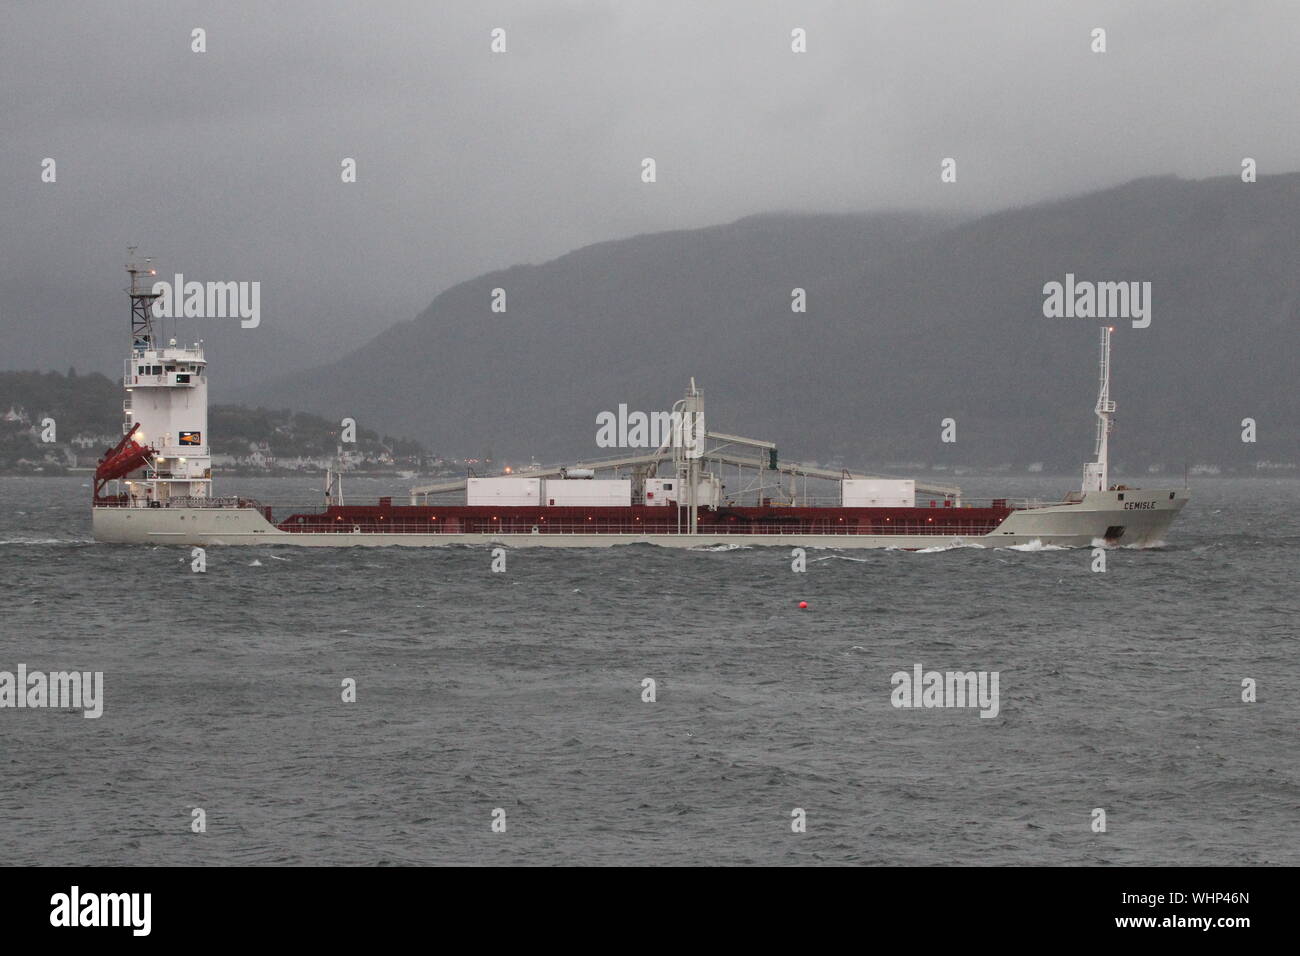 Cemisle, a cement carrier vessel, passing Cloch Point, Gourock, on the Firth of Clyde. Stock Photo